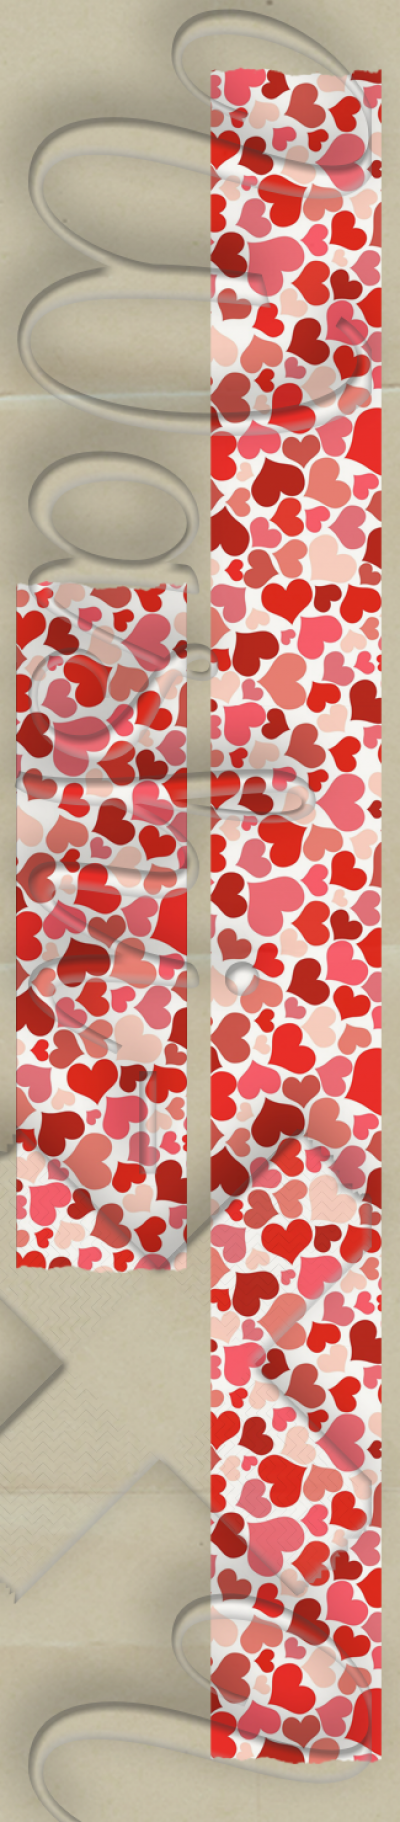 Red hearts patterned washi tape